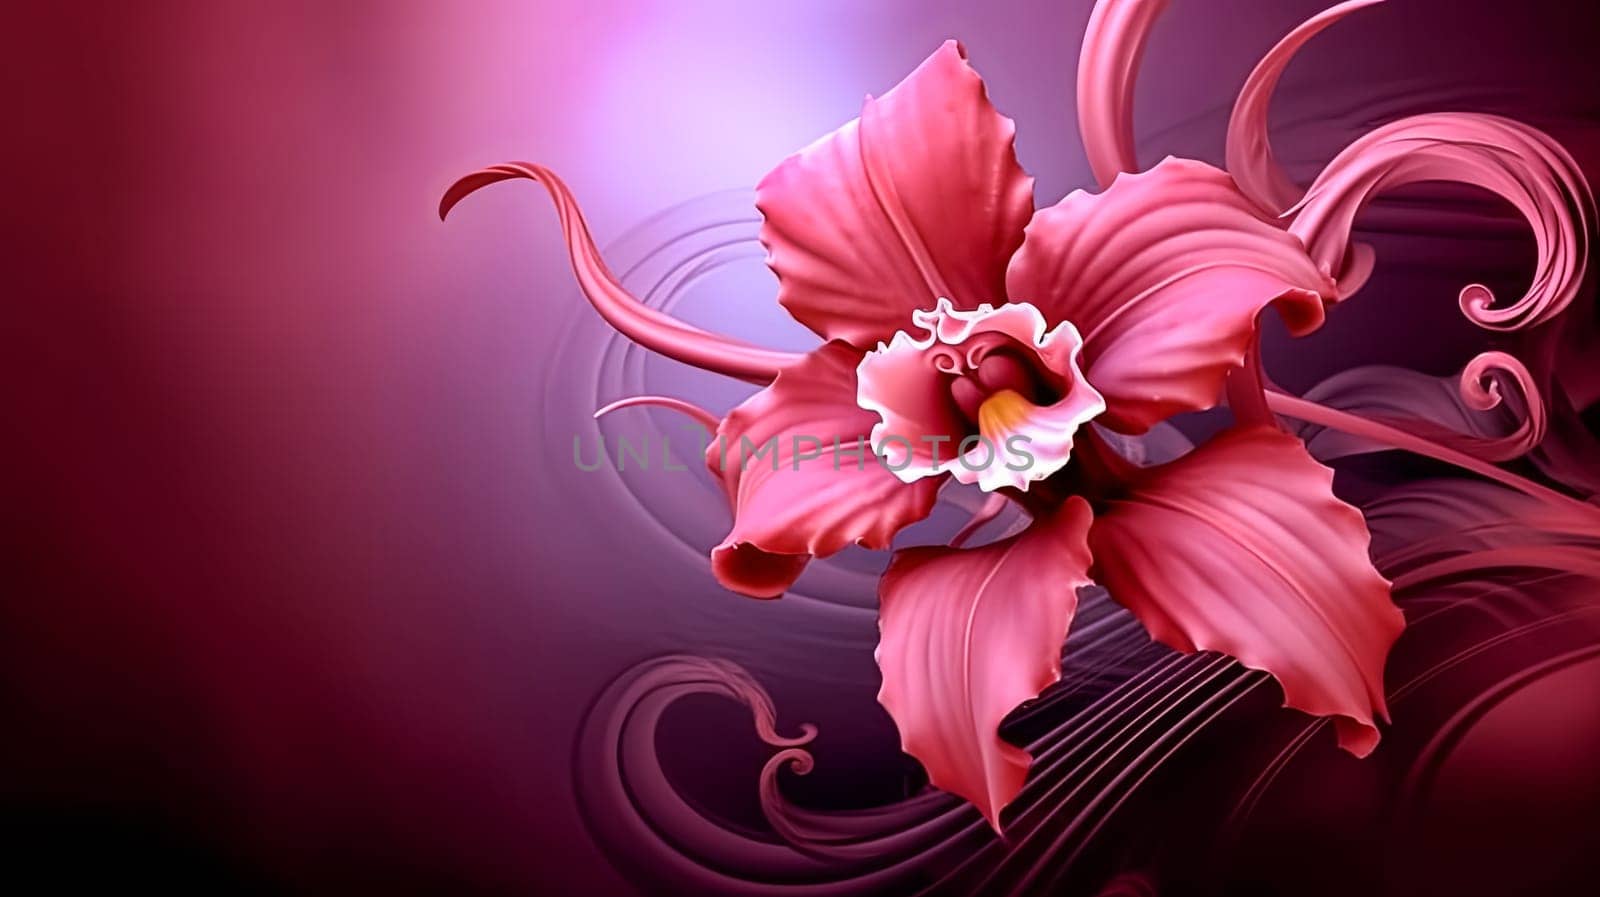 Two pink orchids are shown on a purple background. The flowers are in full bloom and are the main focus of the image. The purple background adds a sense of depth and contrast to the flowers